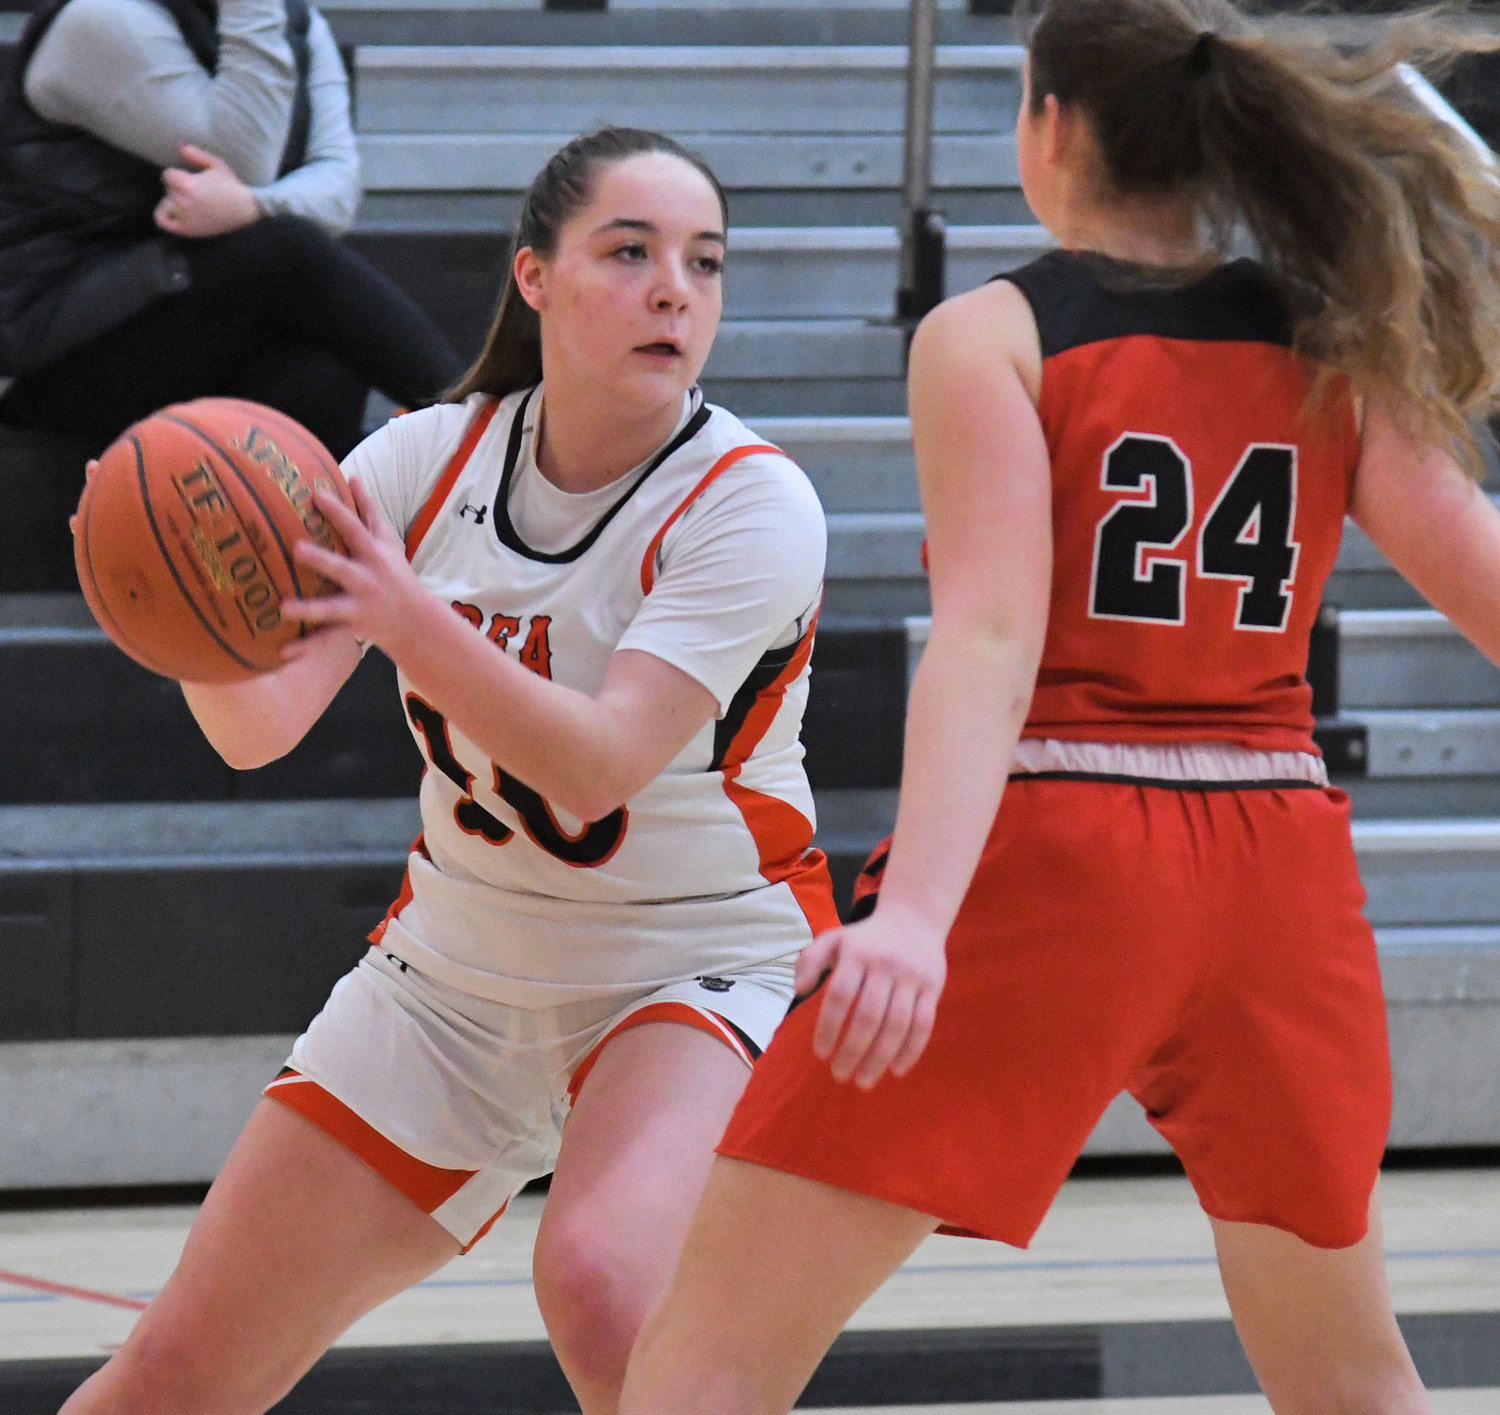 Raelyn Dole of Rome Free Academy looks for a teammate while guarded by Vernon-Verona-Sherrill's Santina Garcia in the first quarter Monday night at RFA. The Black Knights won 66-24.